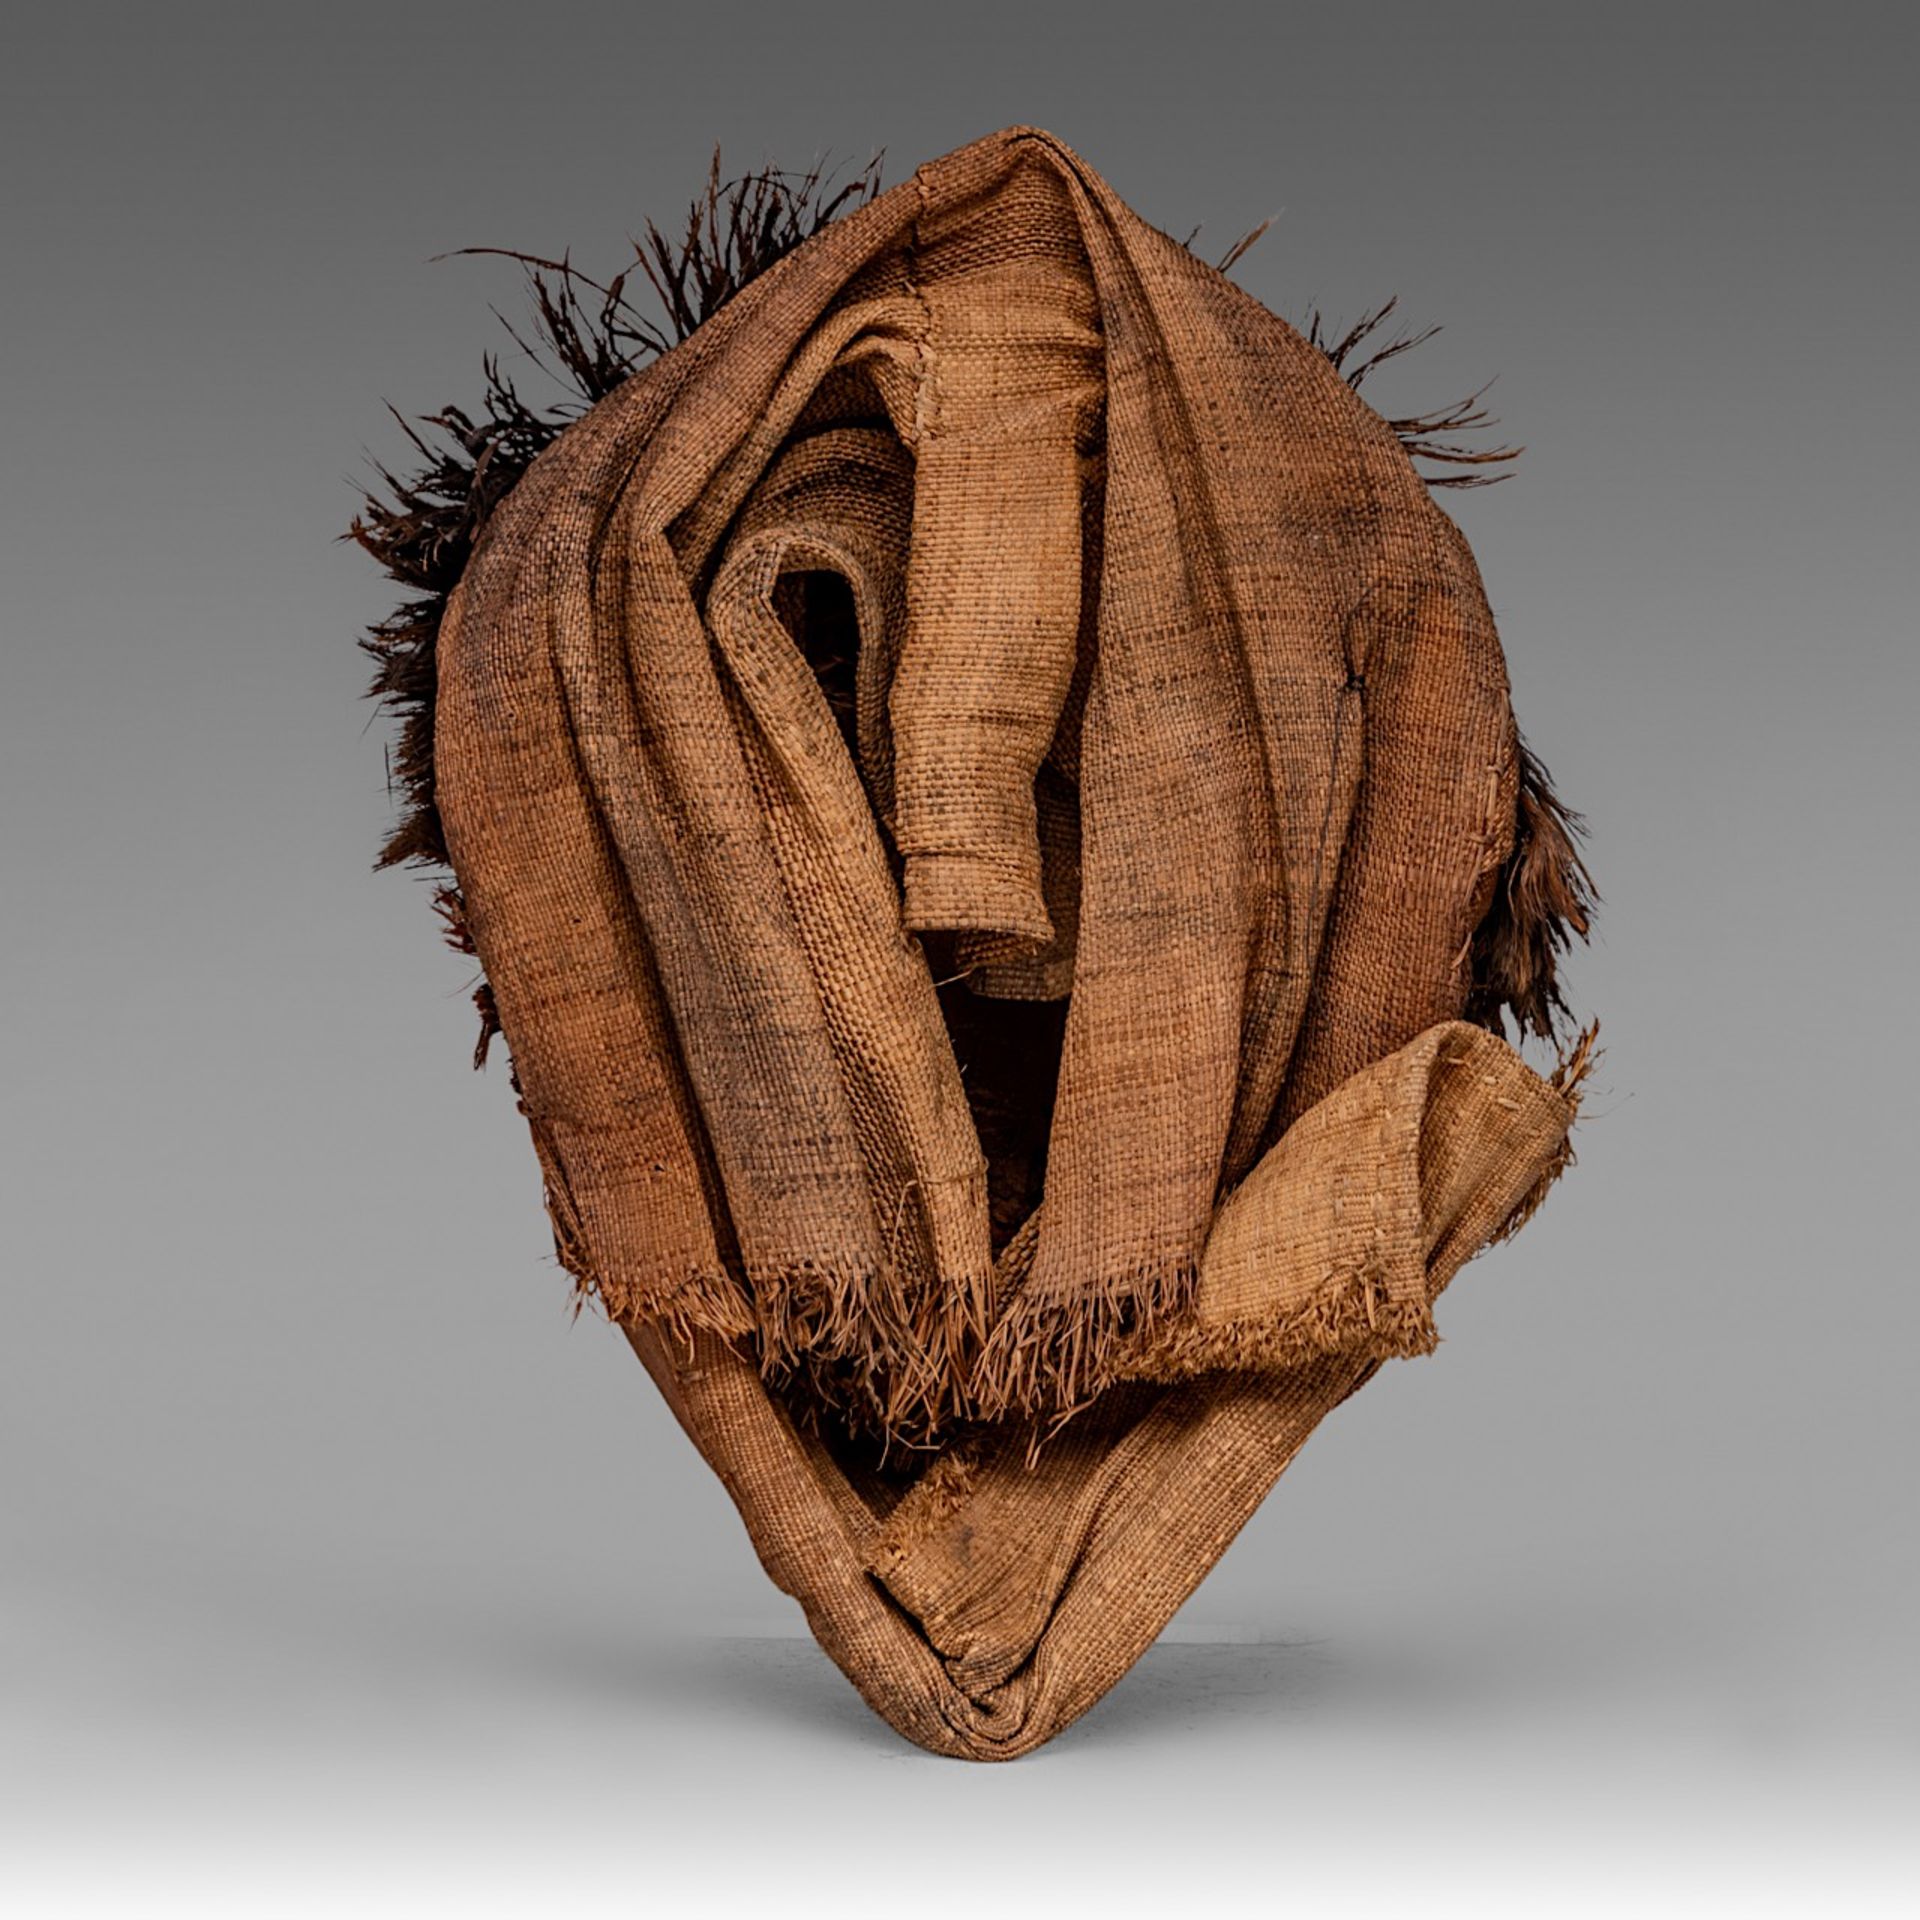 A 'Mbuya' dance mask of the Pende people, Democratic Republic of Congo, H 30 cm - Image 4 of 4